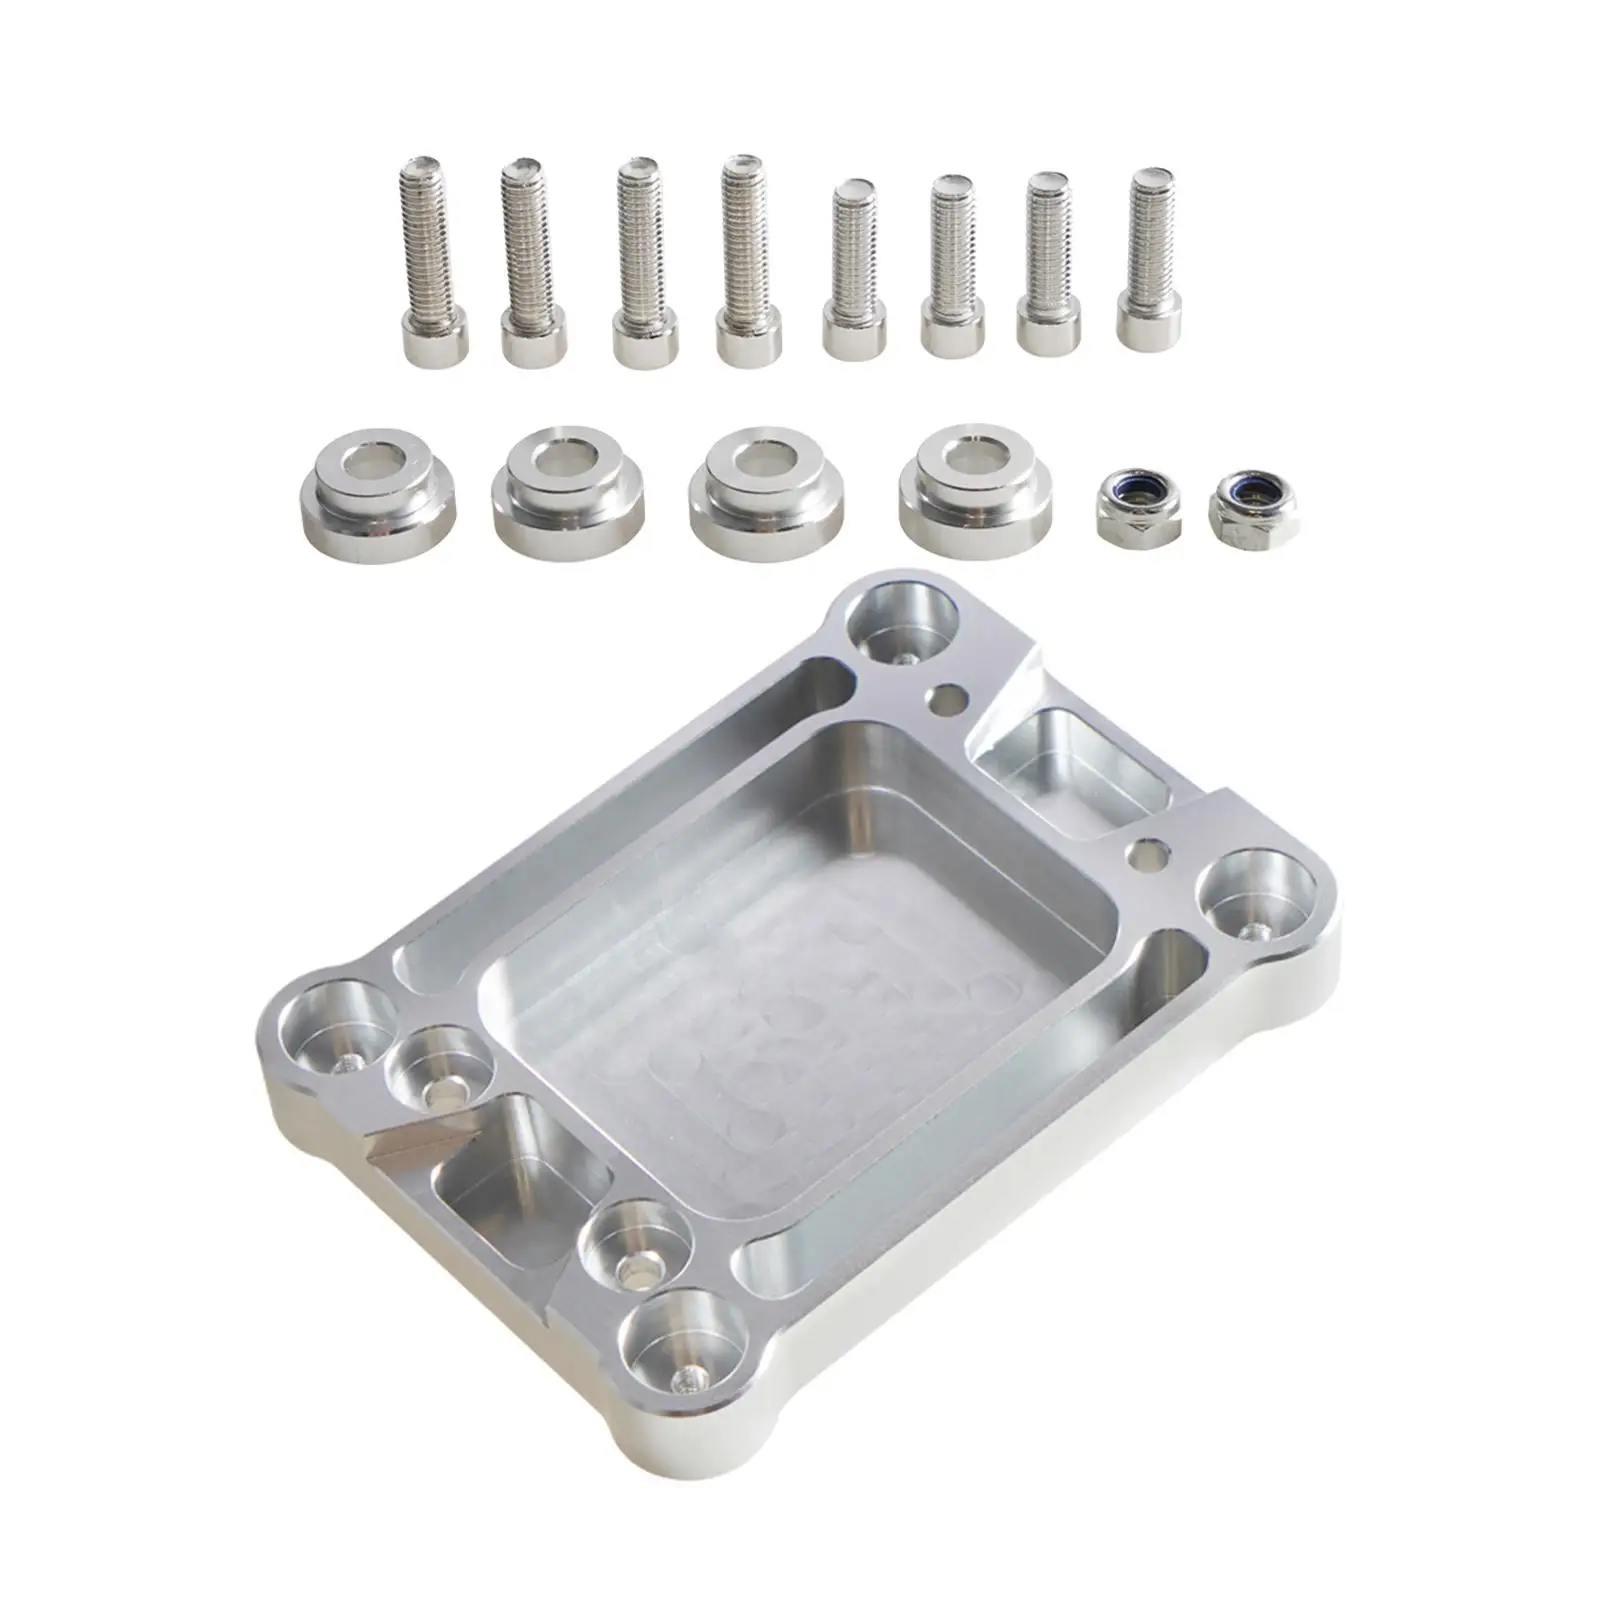 Billet Shifter Box Base Plate Practical for Acura Integra 1994-2001